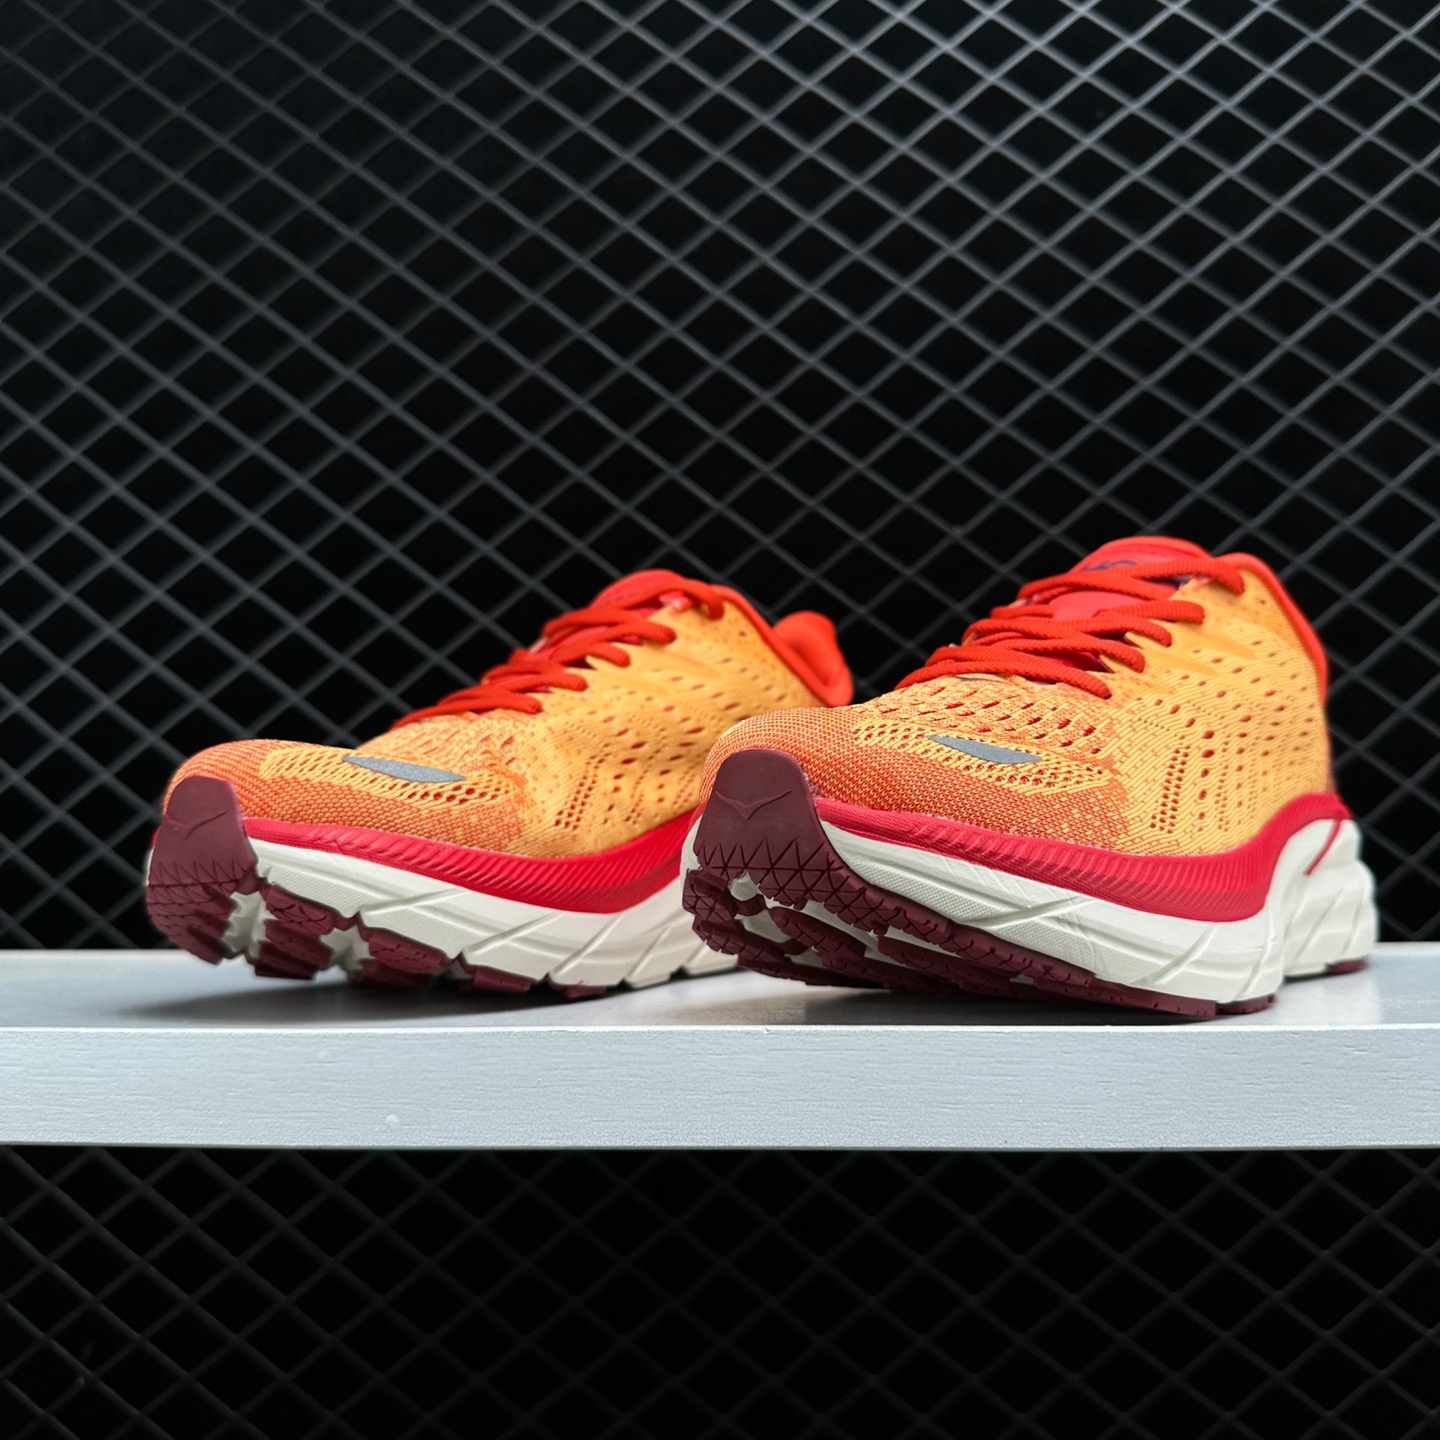 Hoka One One Clifton 8 Red Orange Running Shoes: Lightweight & Cushioned!